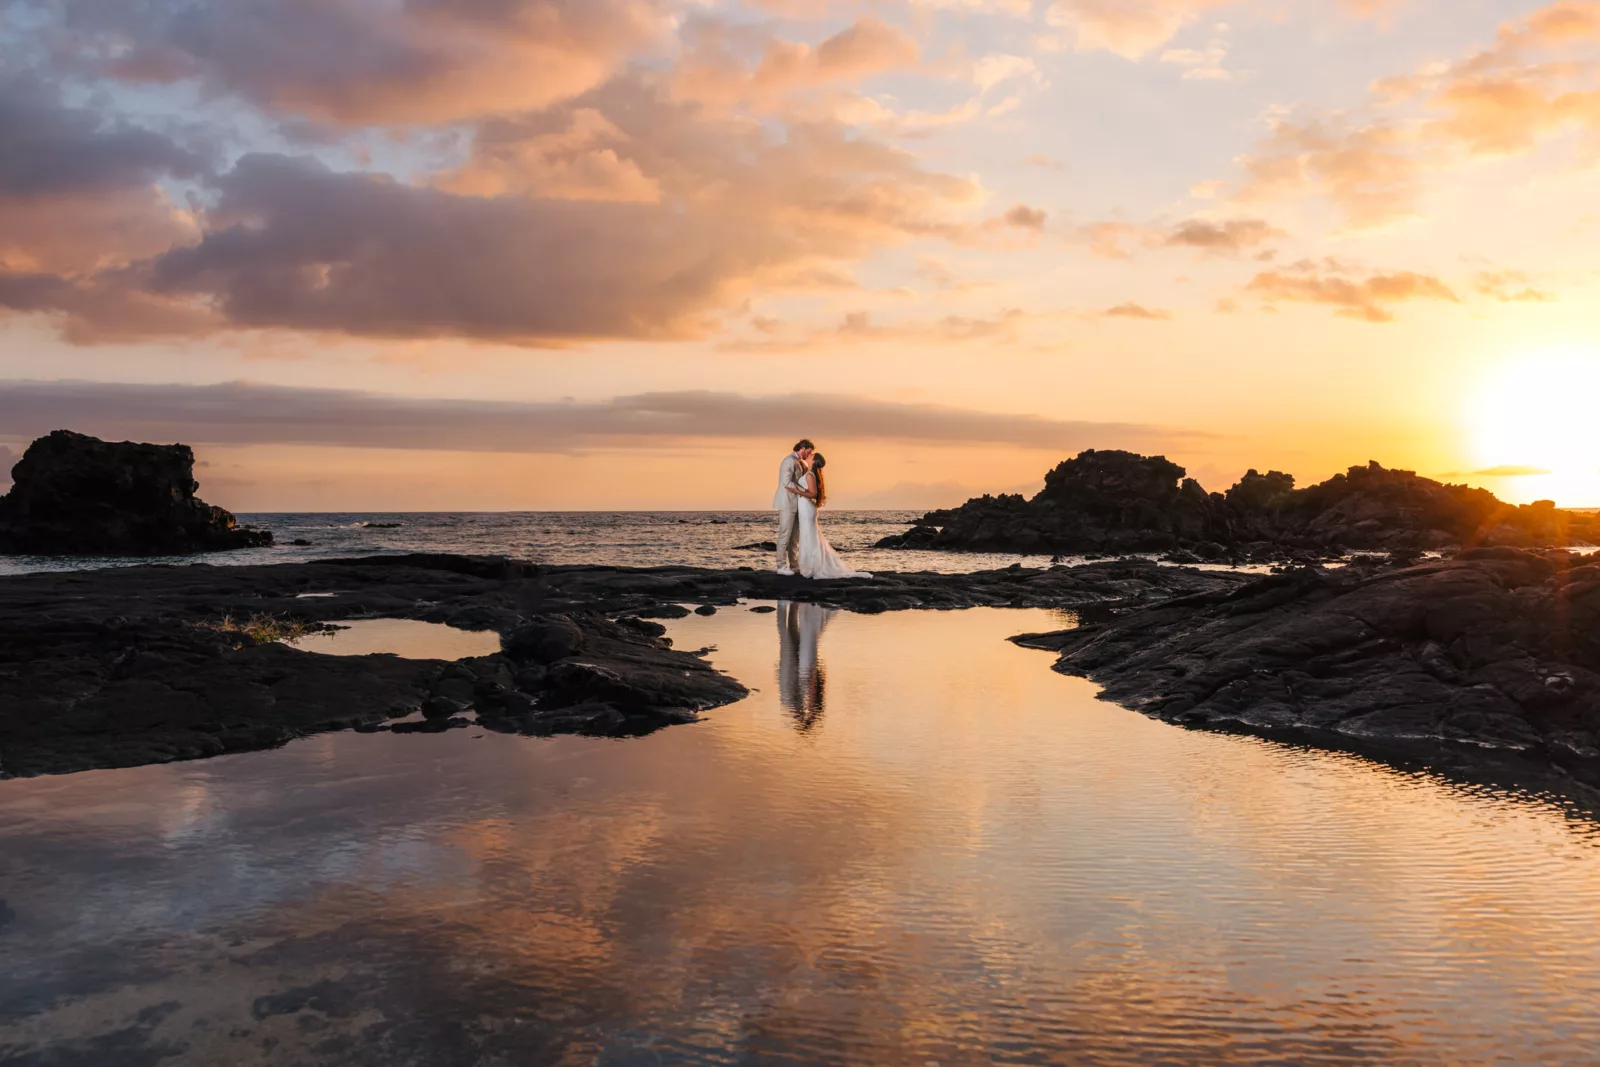 Epic sunset skies and beautiful water after a Big Island elopement